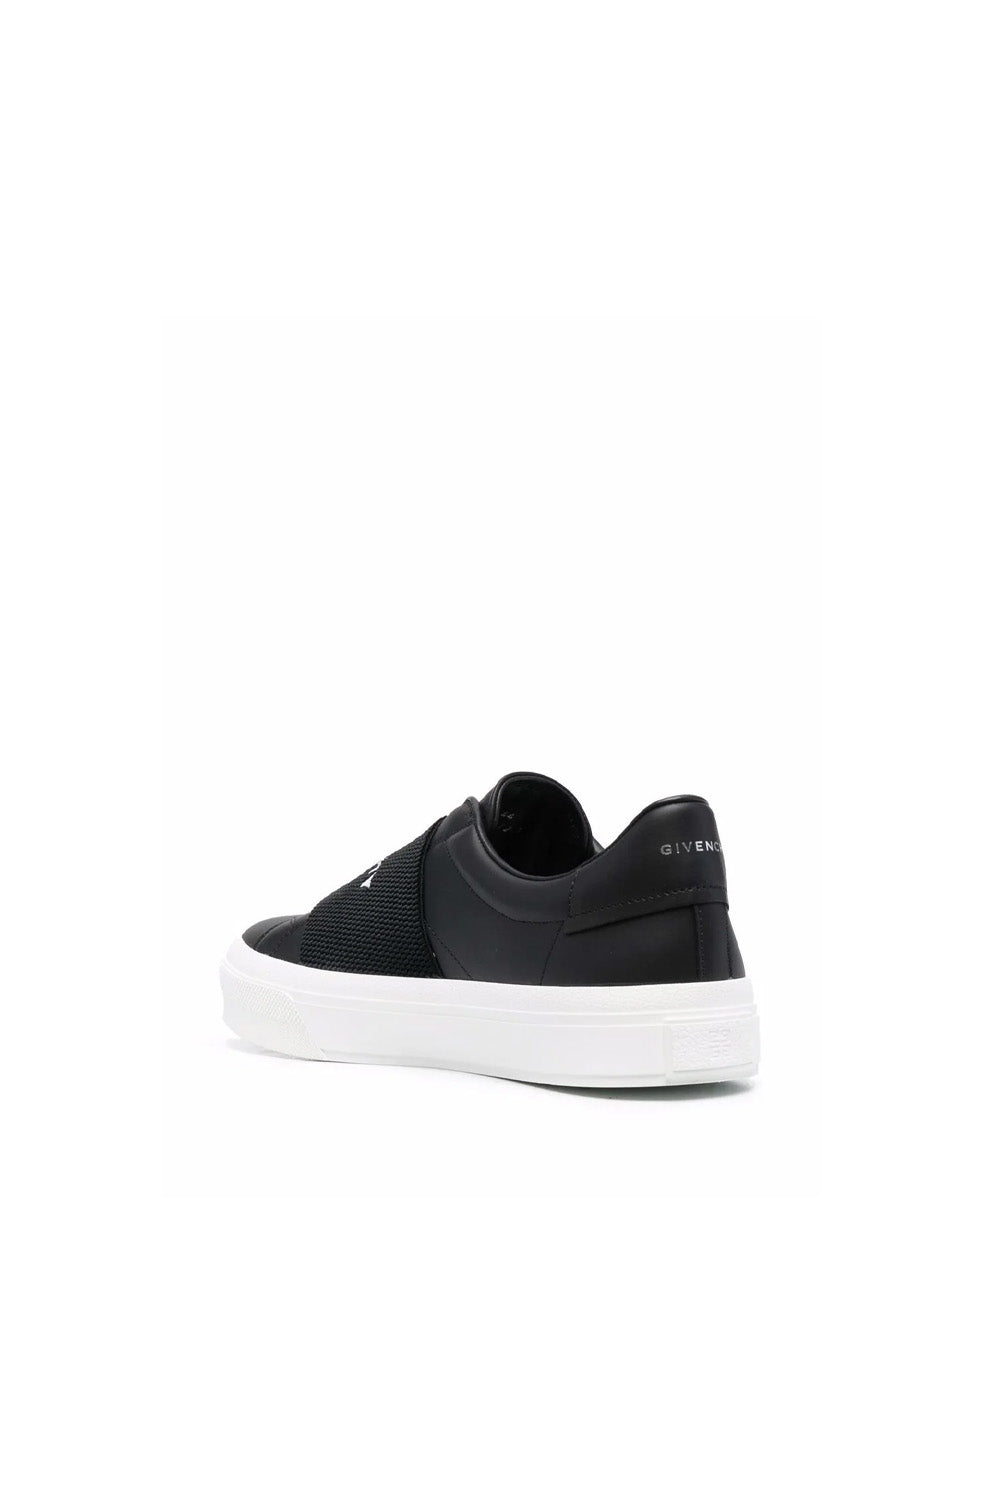 Givenchy Paris Strap leather sneakers